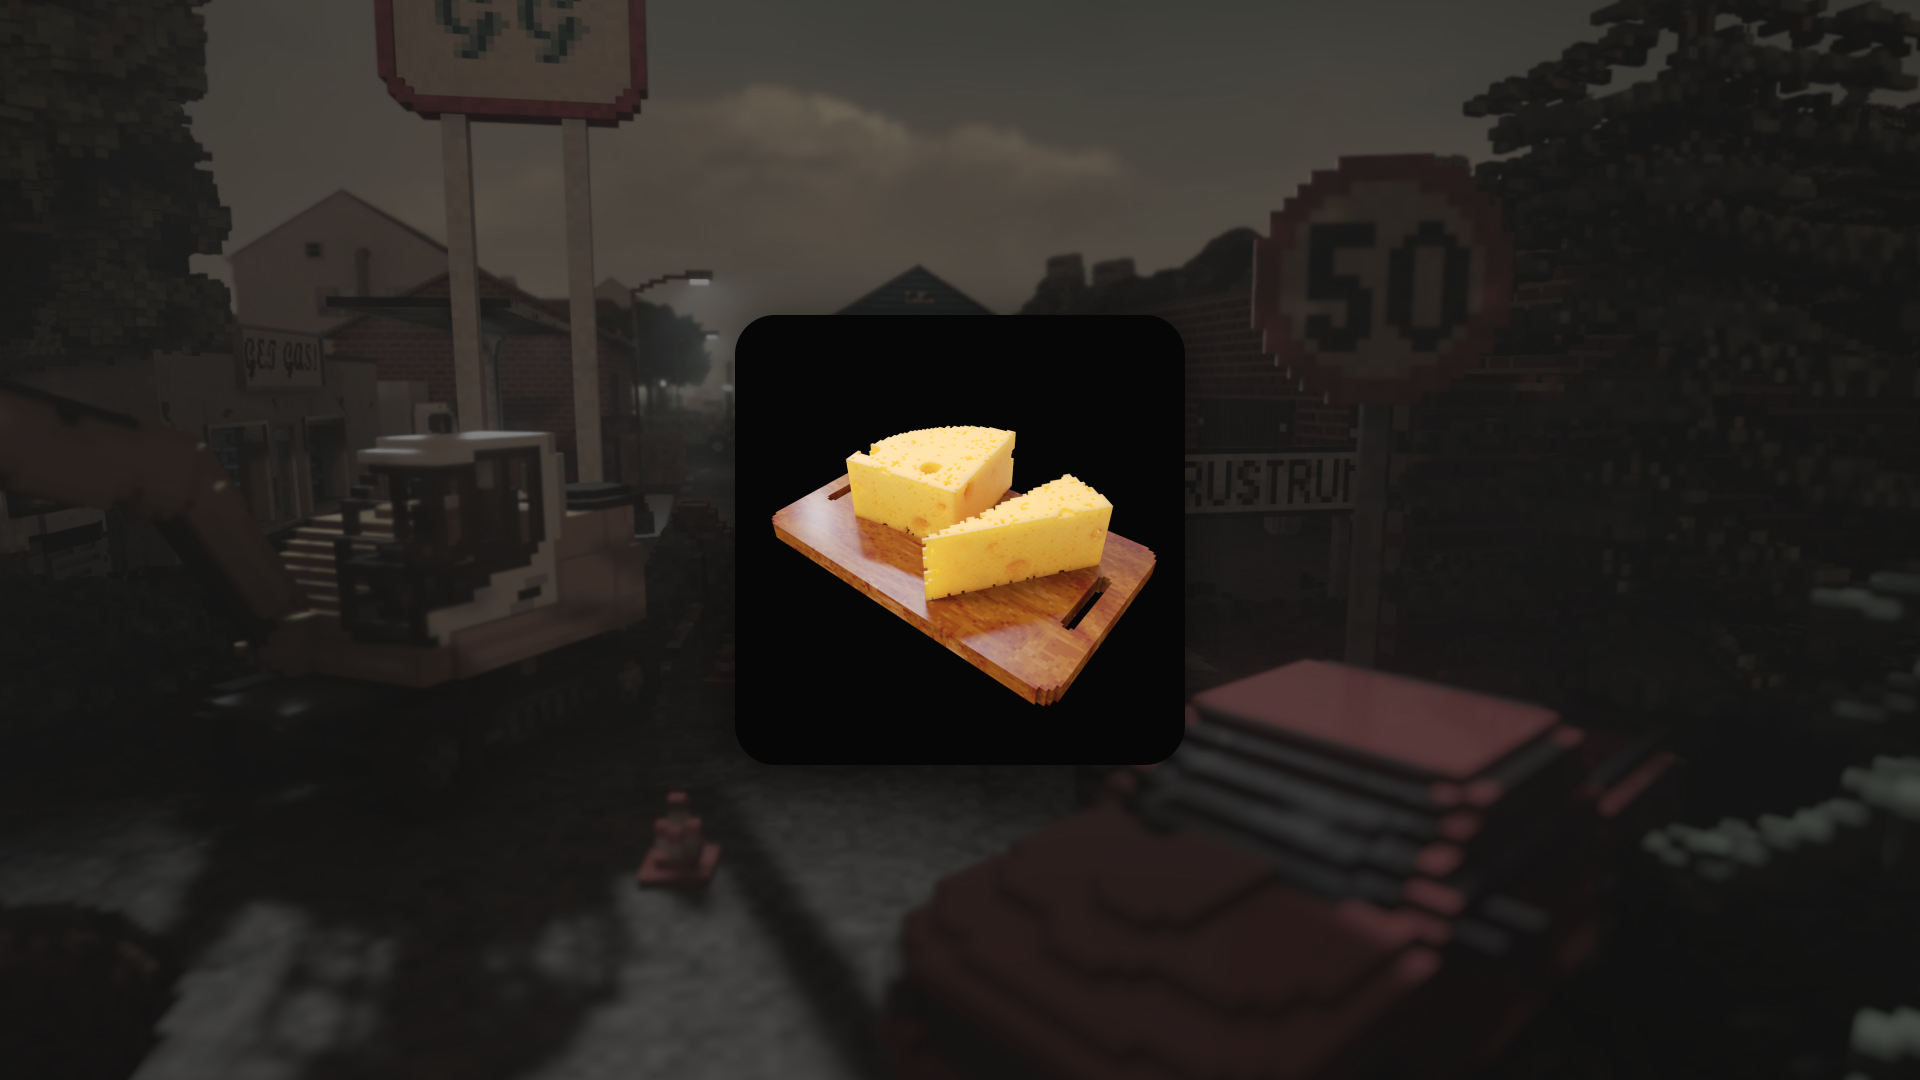 Icon for Swiss cheese